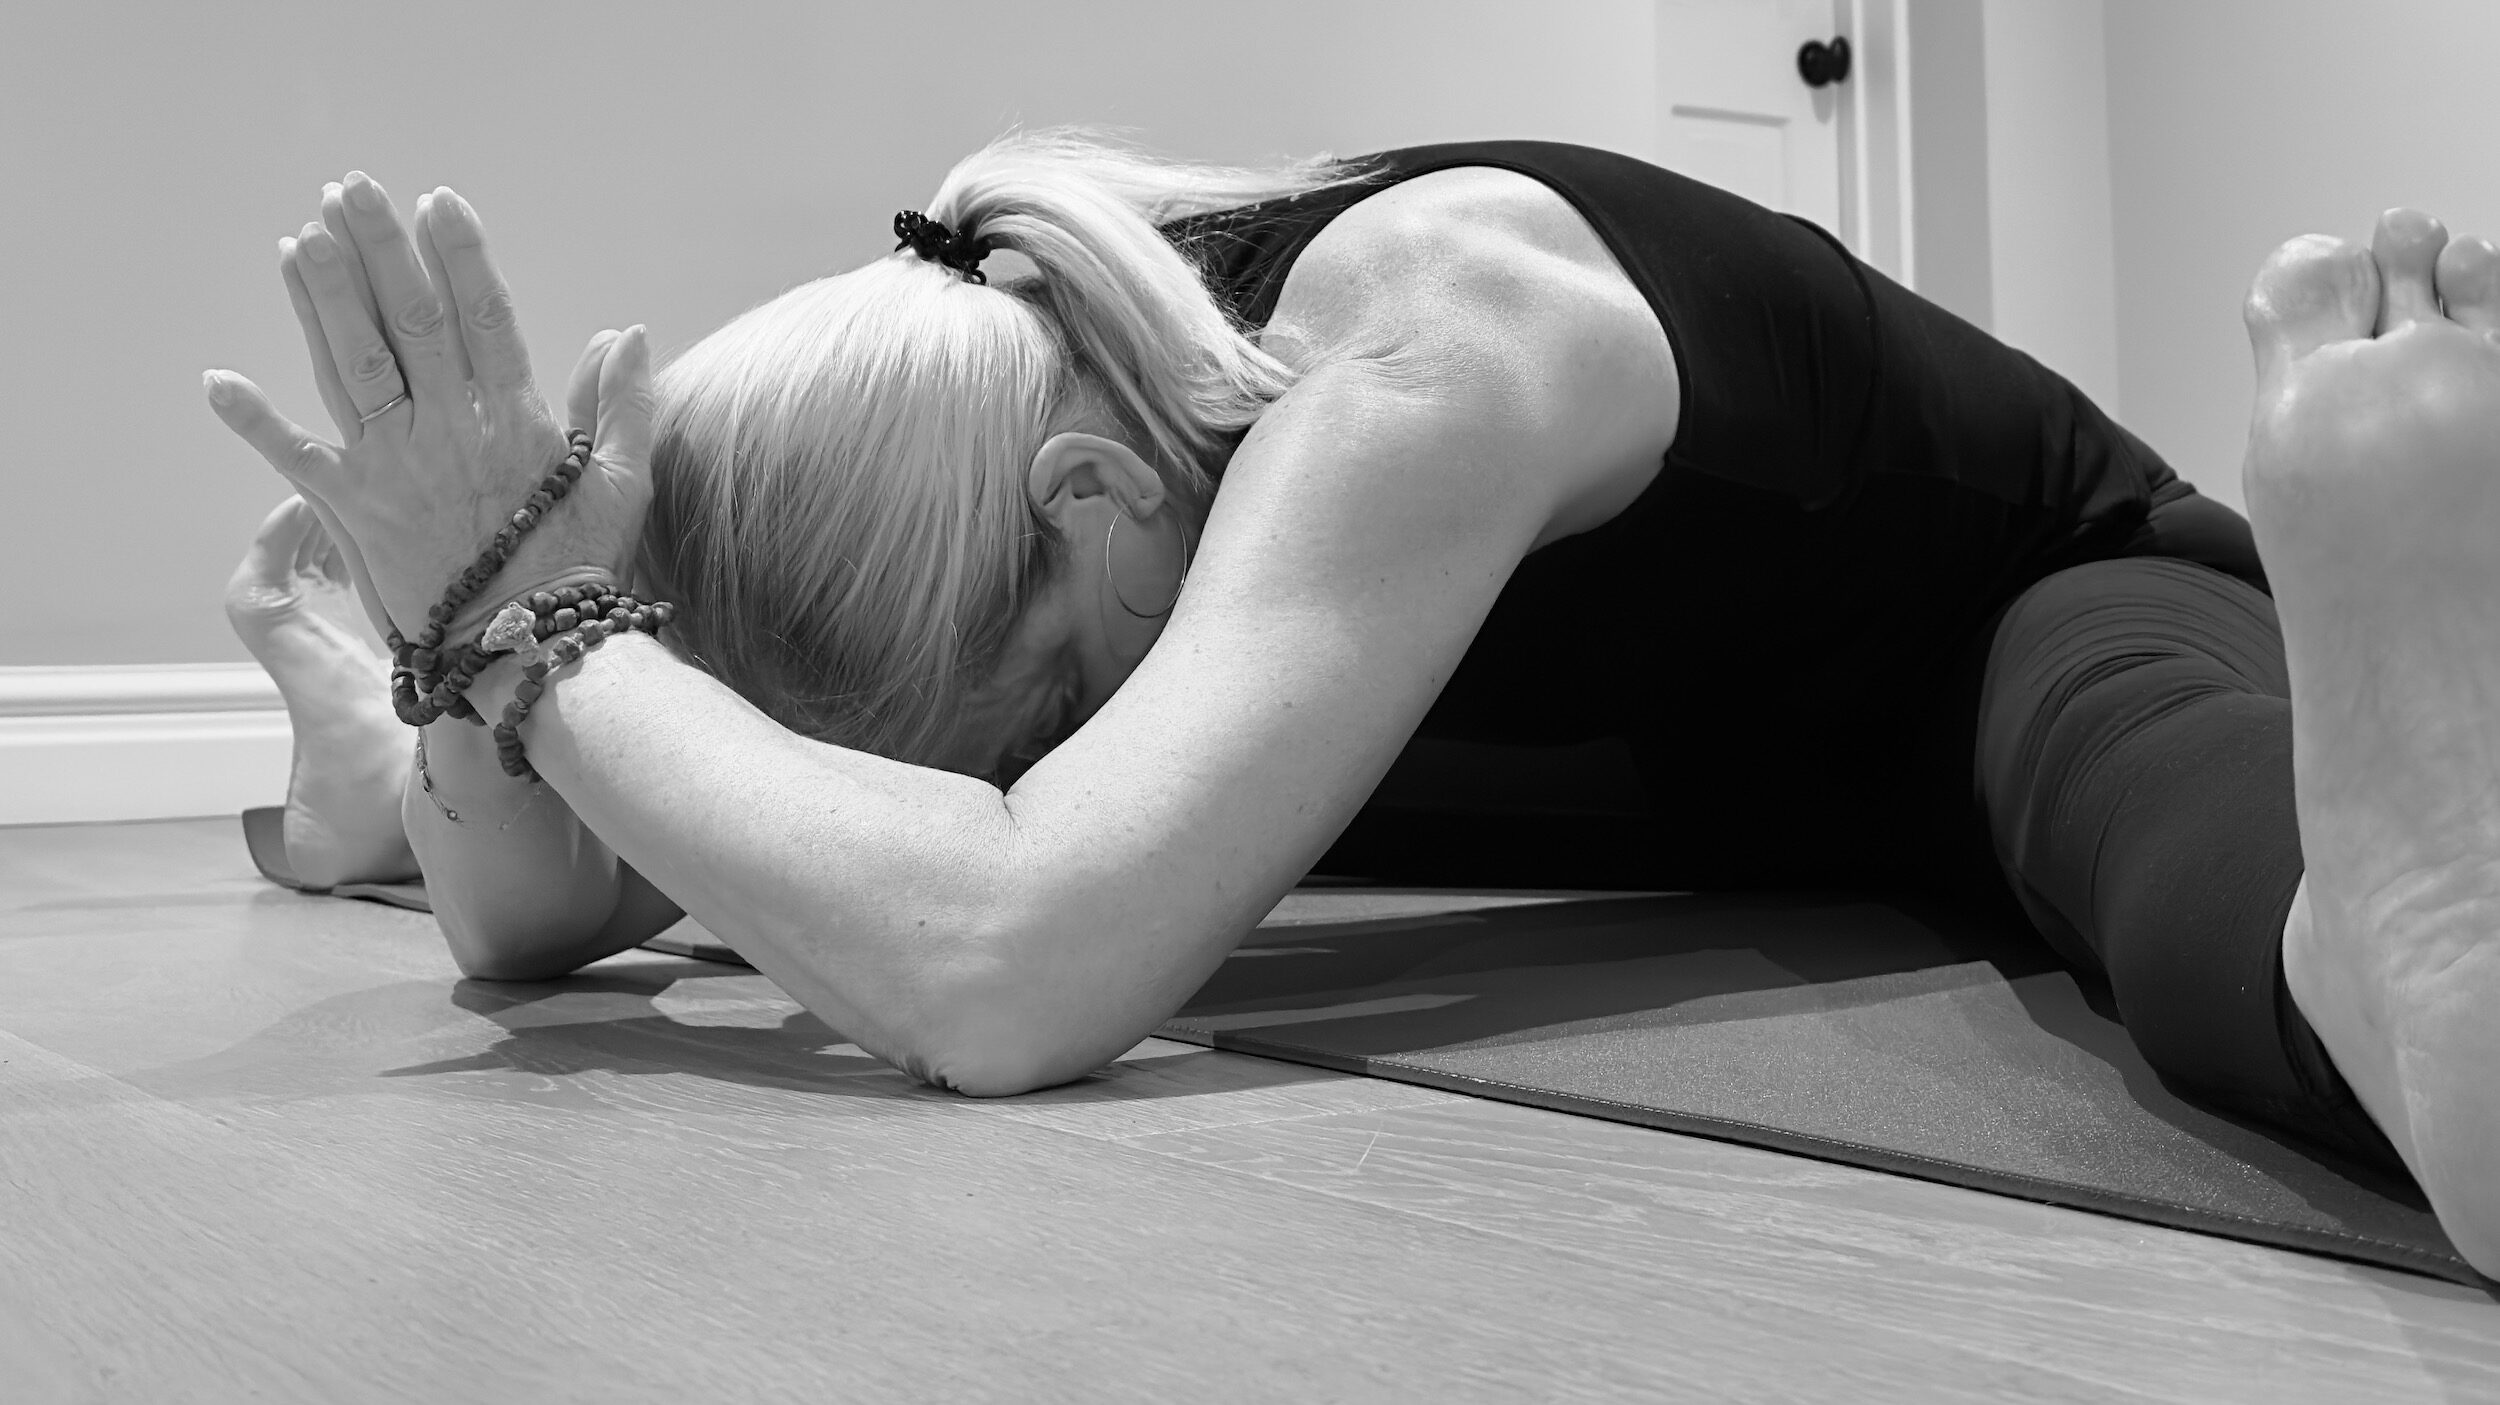 Jilly yoga pose in black and white